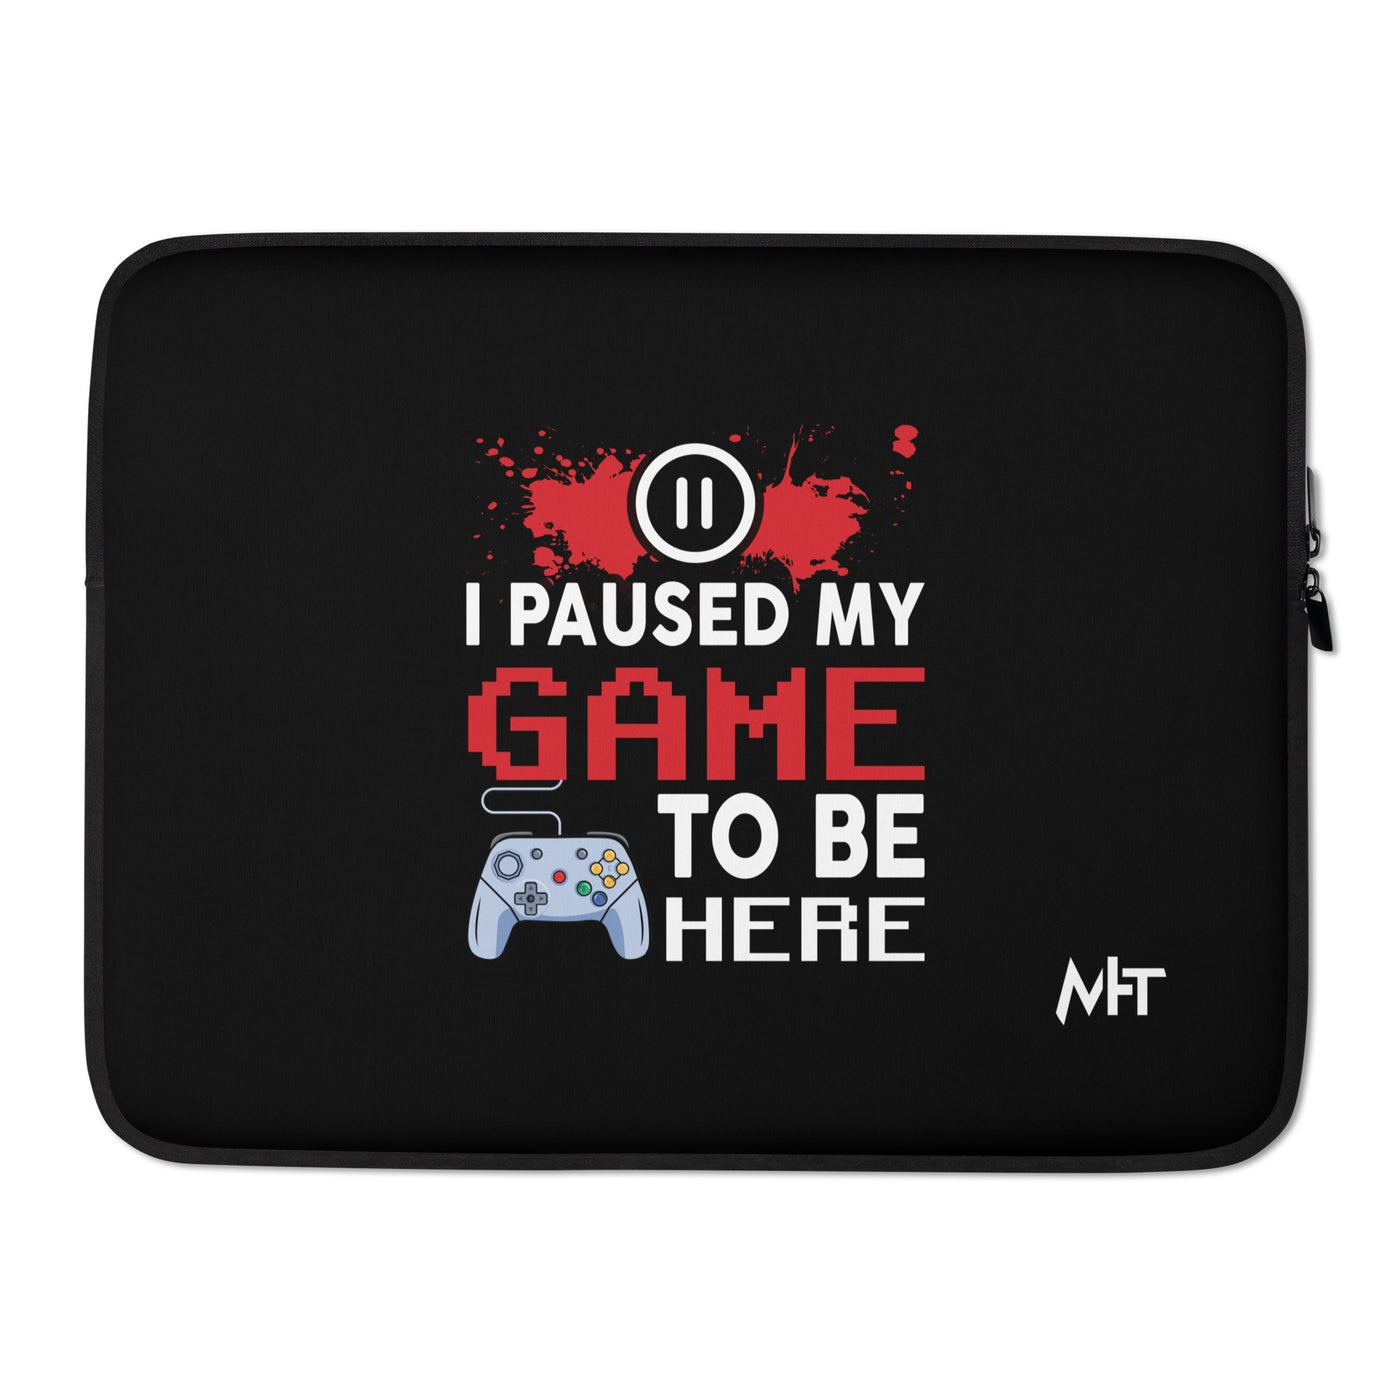 I Paused my Game to be here ( red pixelated text ) - Laptop Sleeve